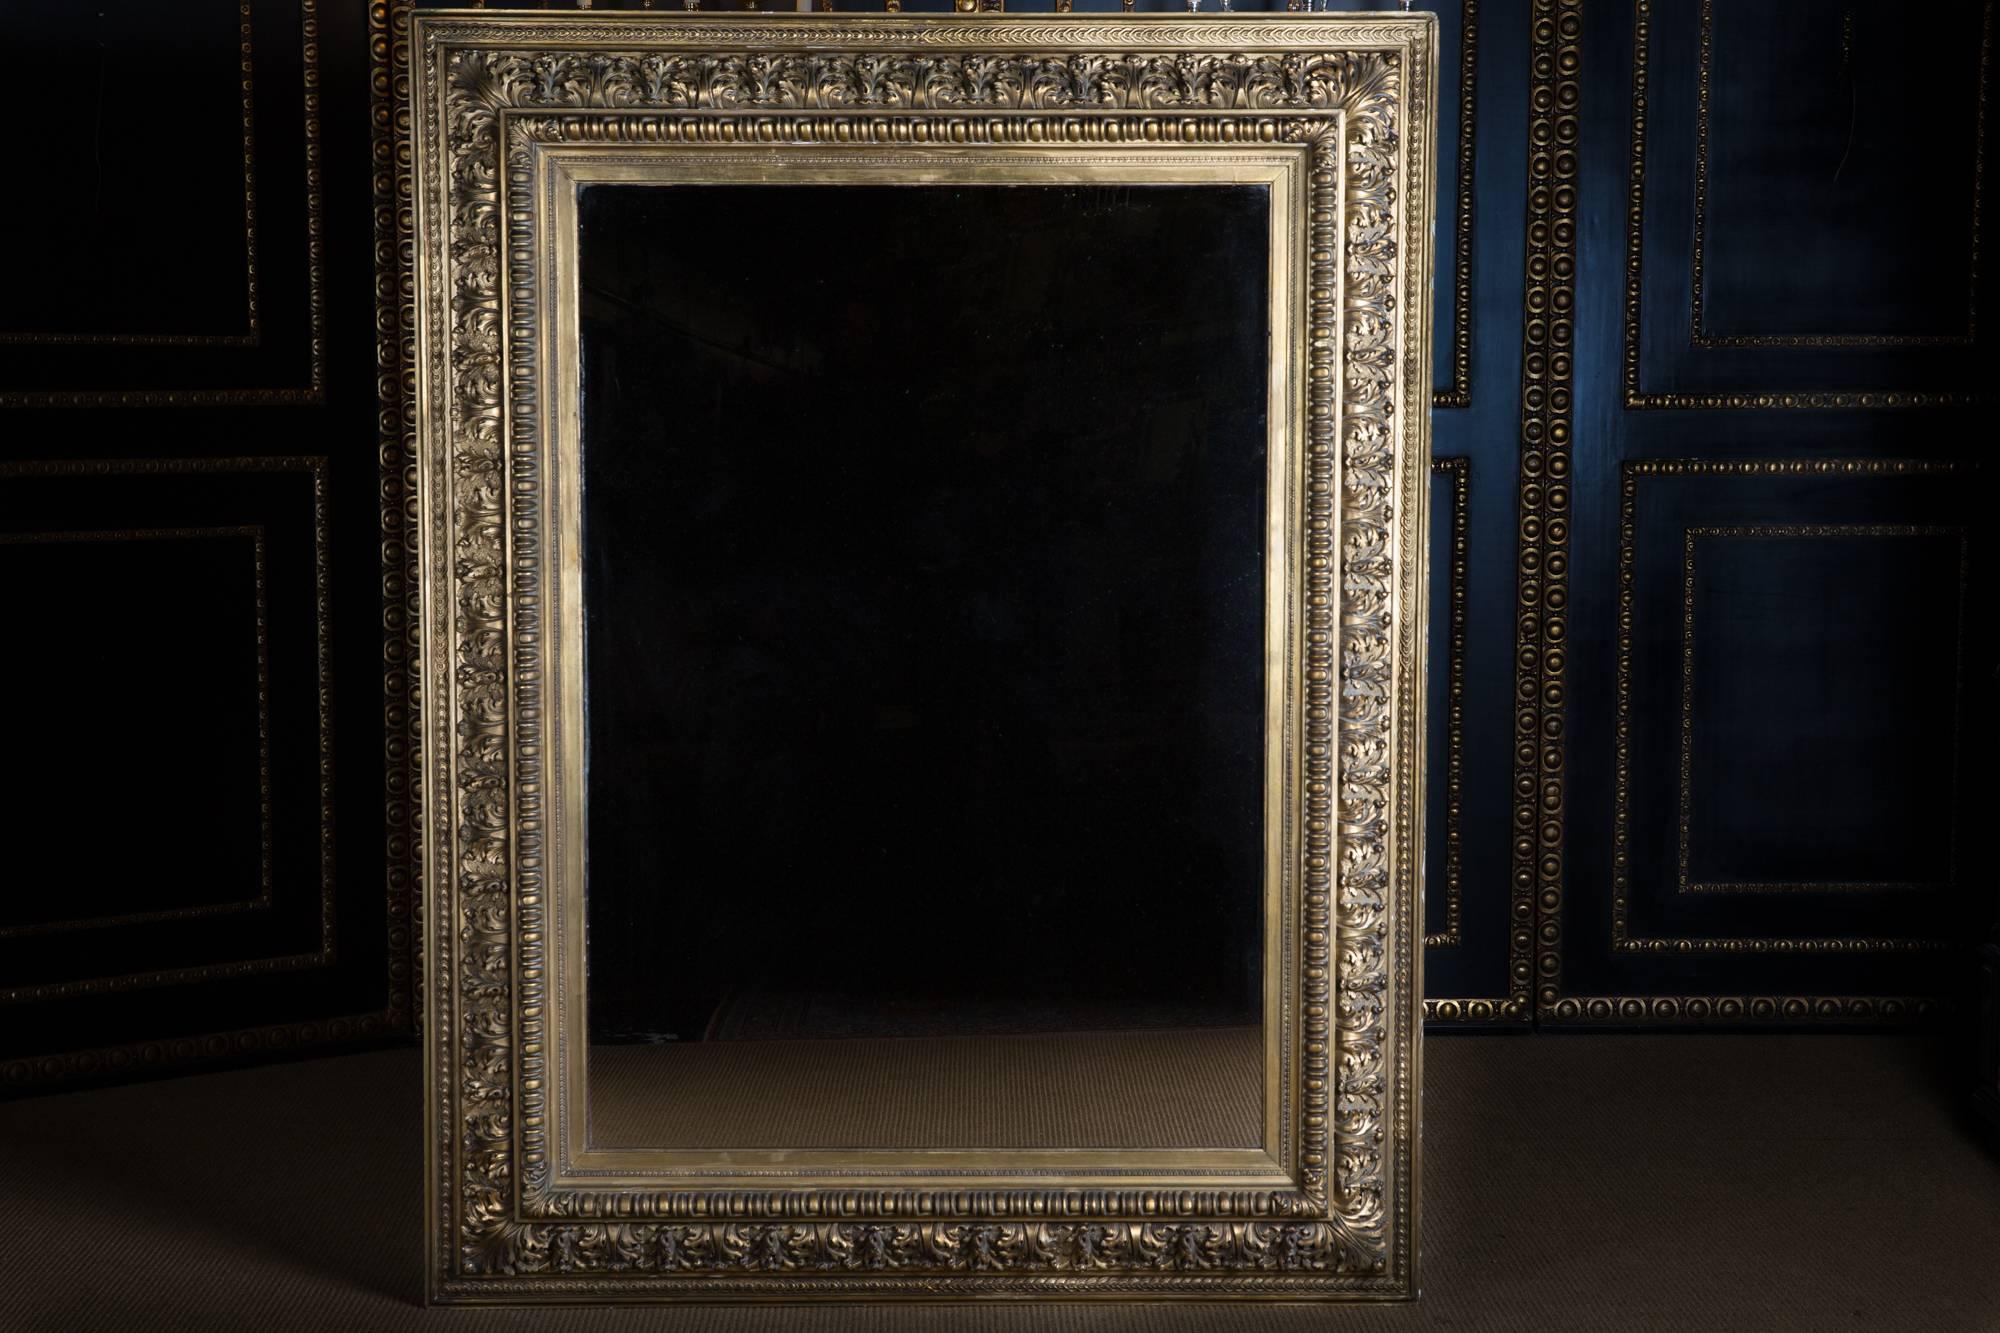 Rectangular frame, plastically profiled ornaments. The entire frame is gilded. The mirror is from the 19th century.

A good historical condition.

